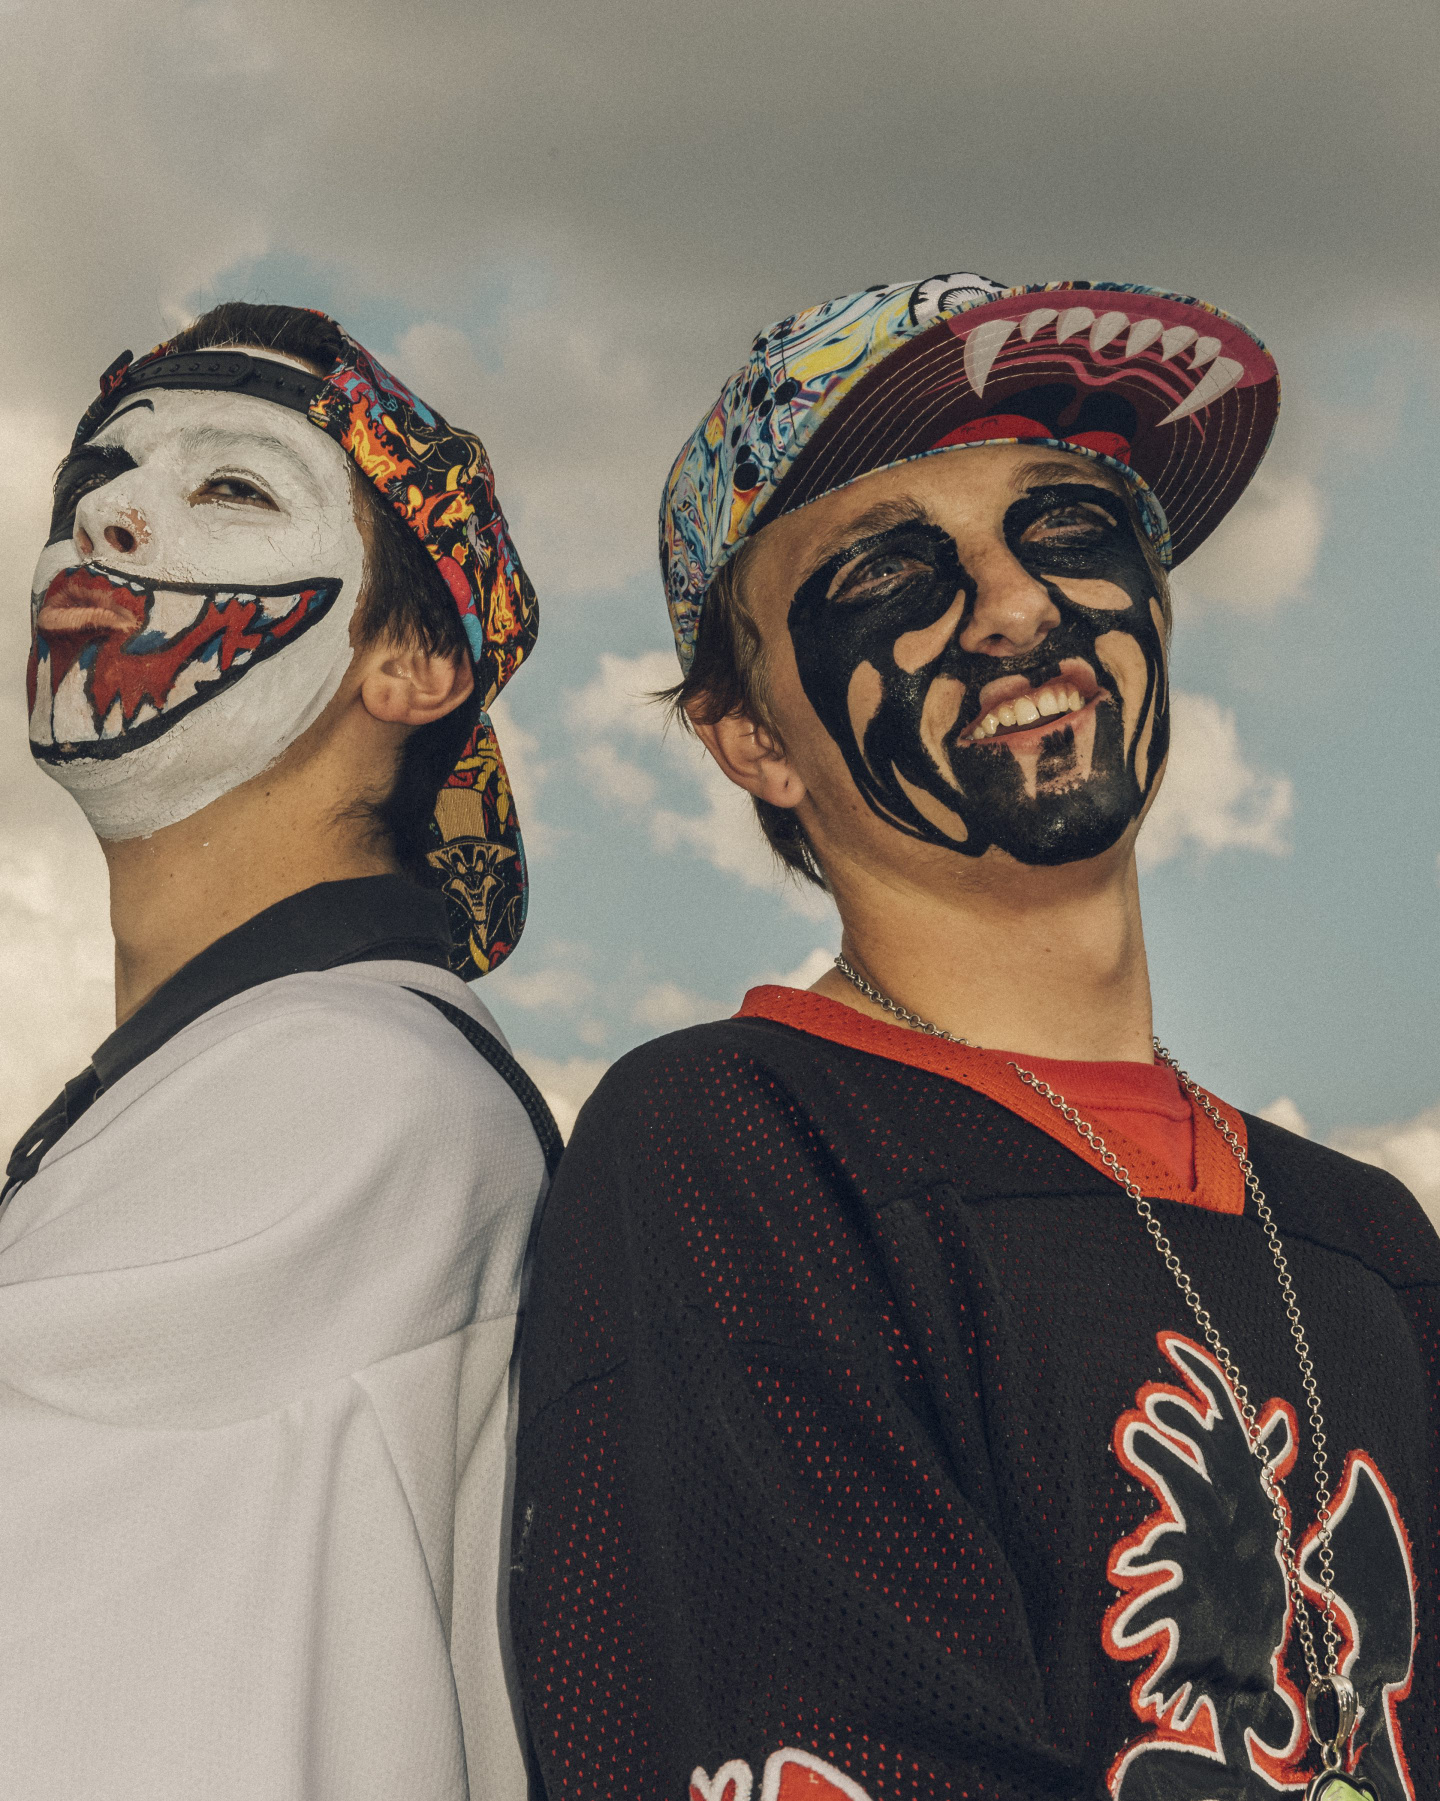 17 Juggalos on what they wish the world would understand about their crazy, loving family